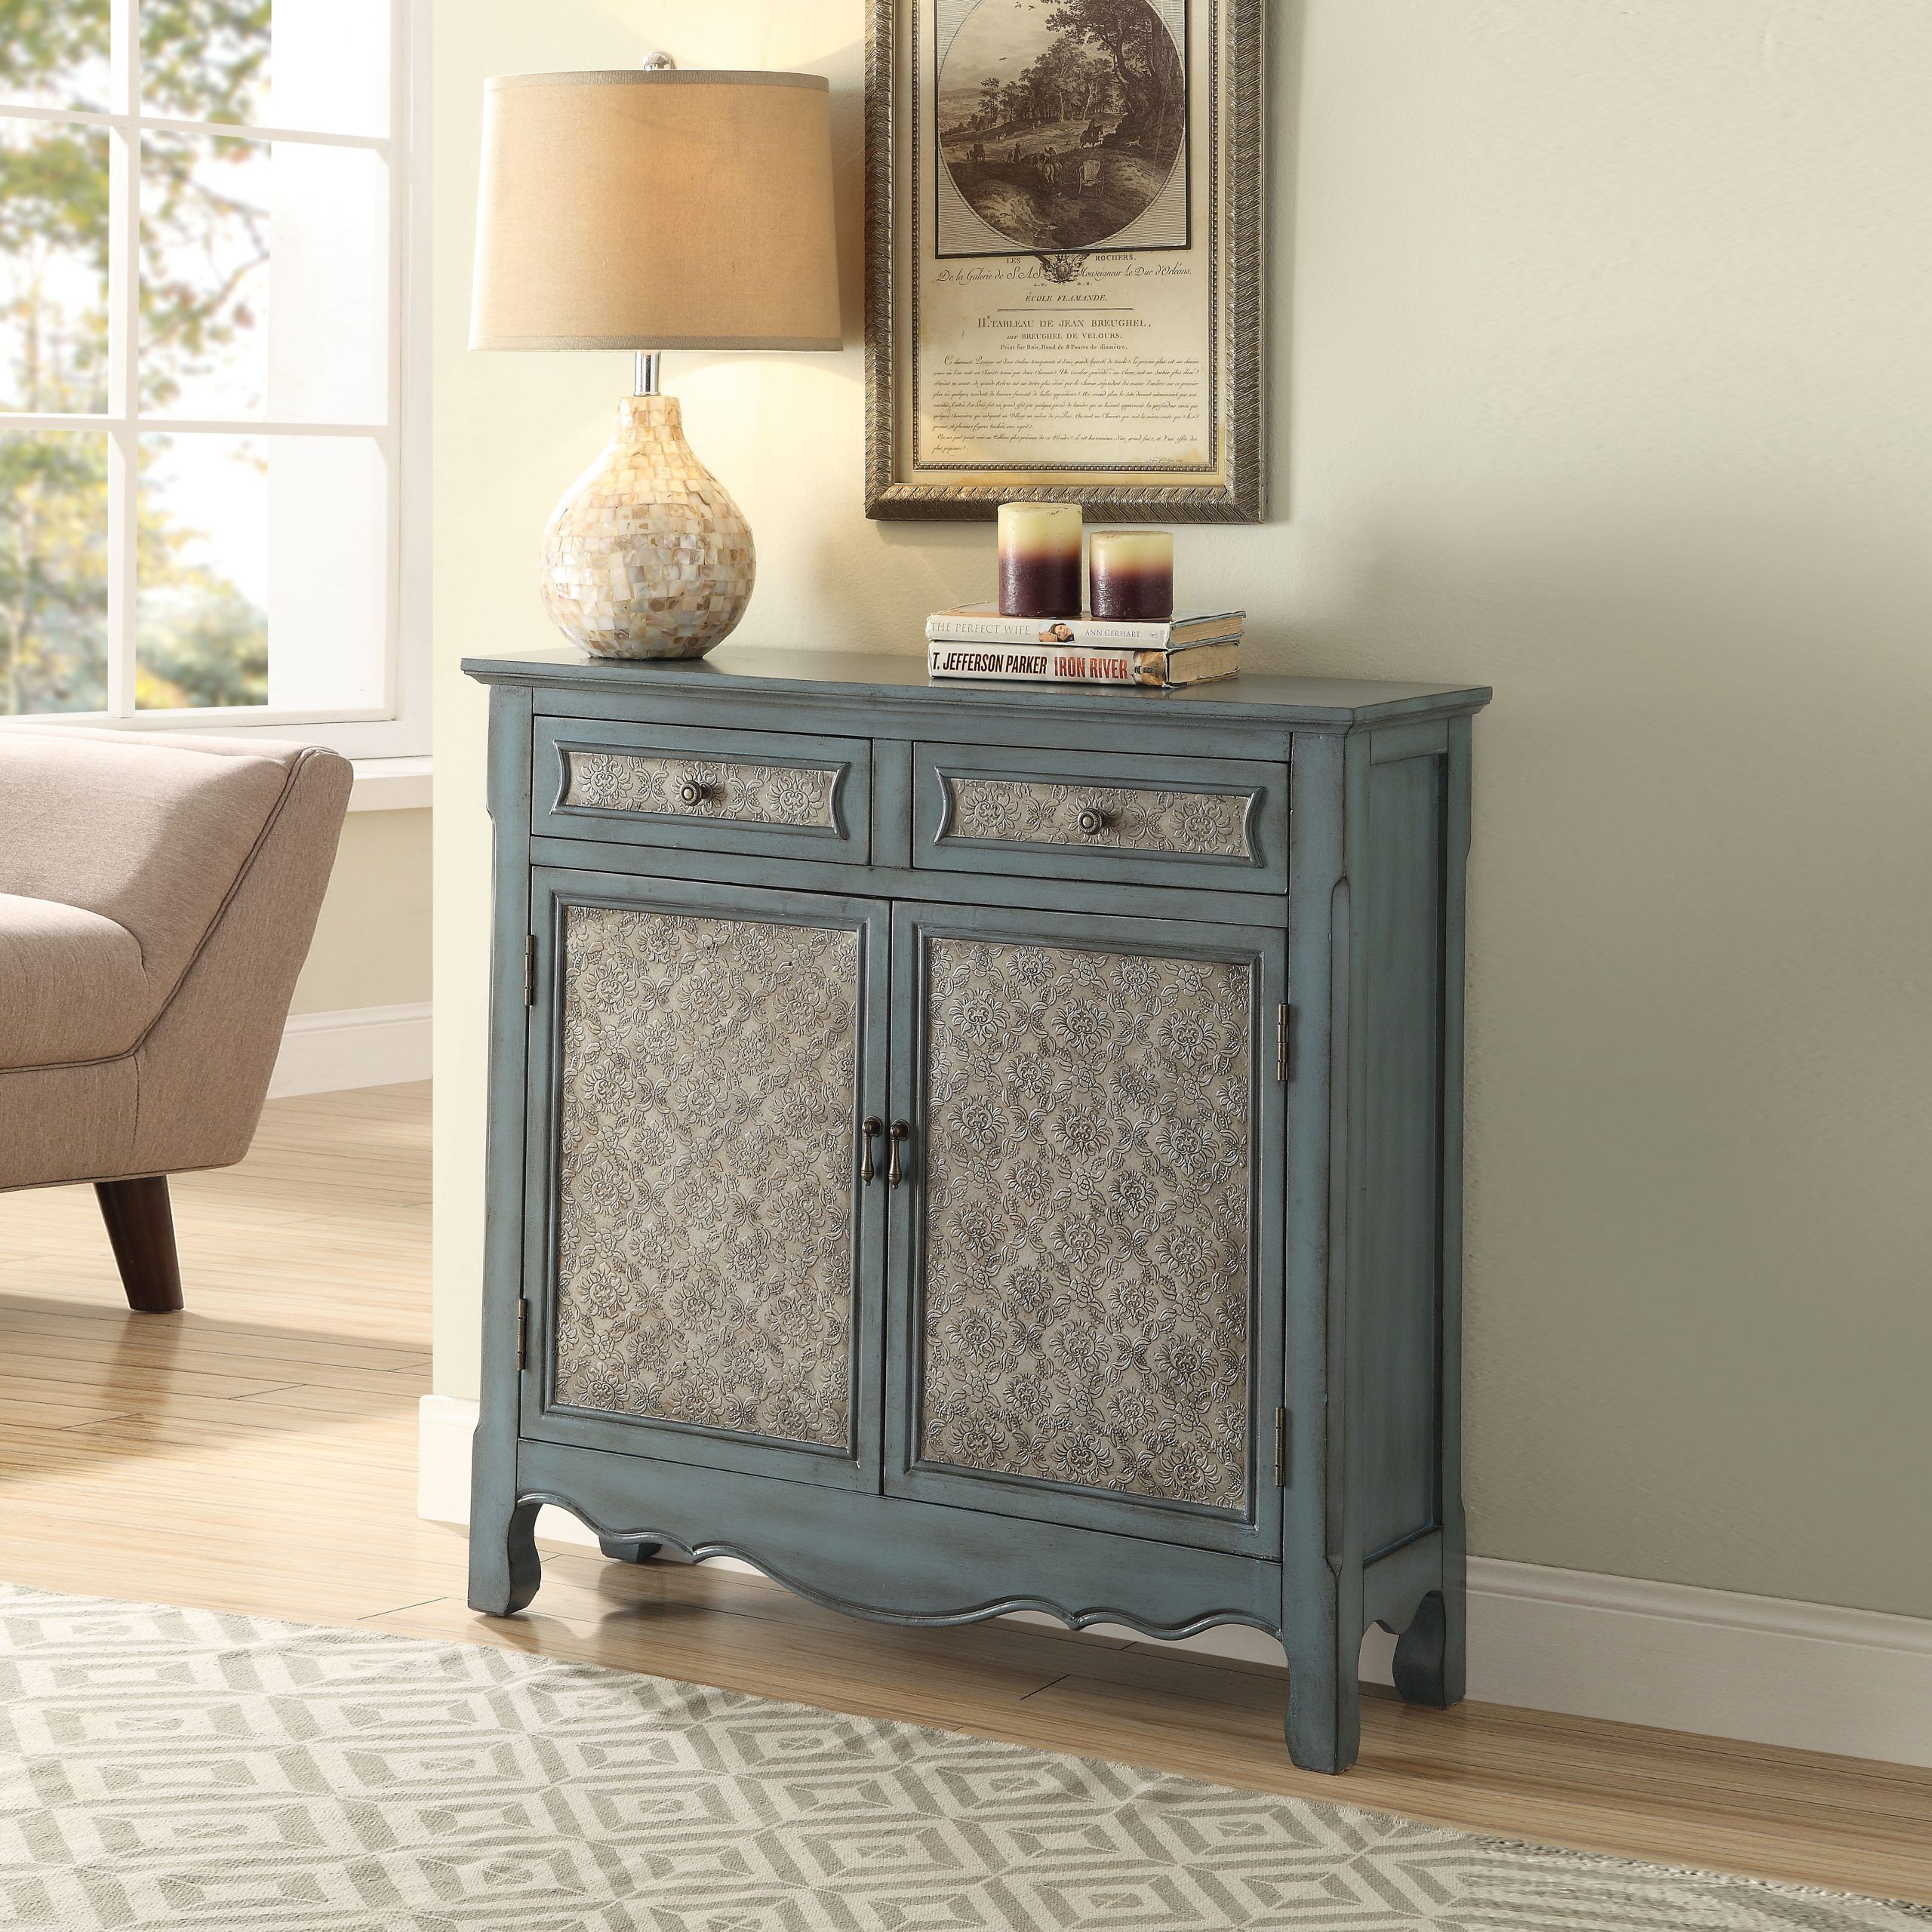 Console Table With Drawers, Antique Blue Finish – Walmart Intended For Antique Silver Metal Console Tables (View 4 of 20)